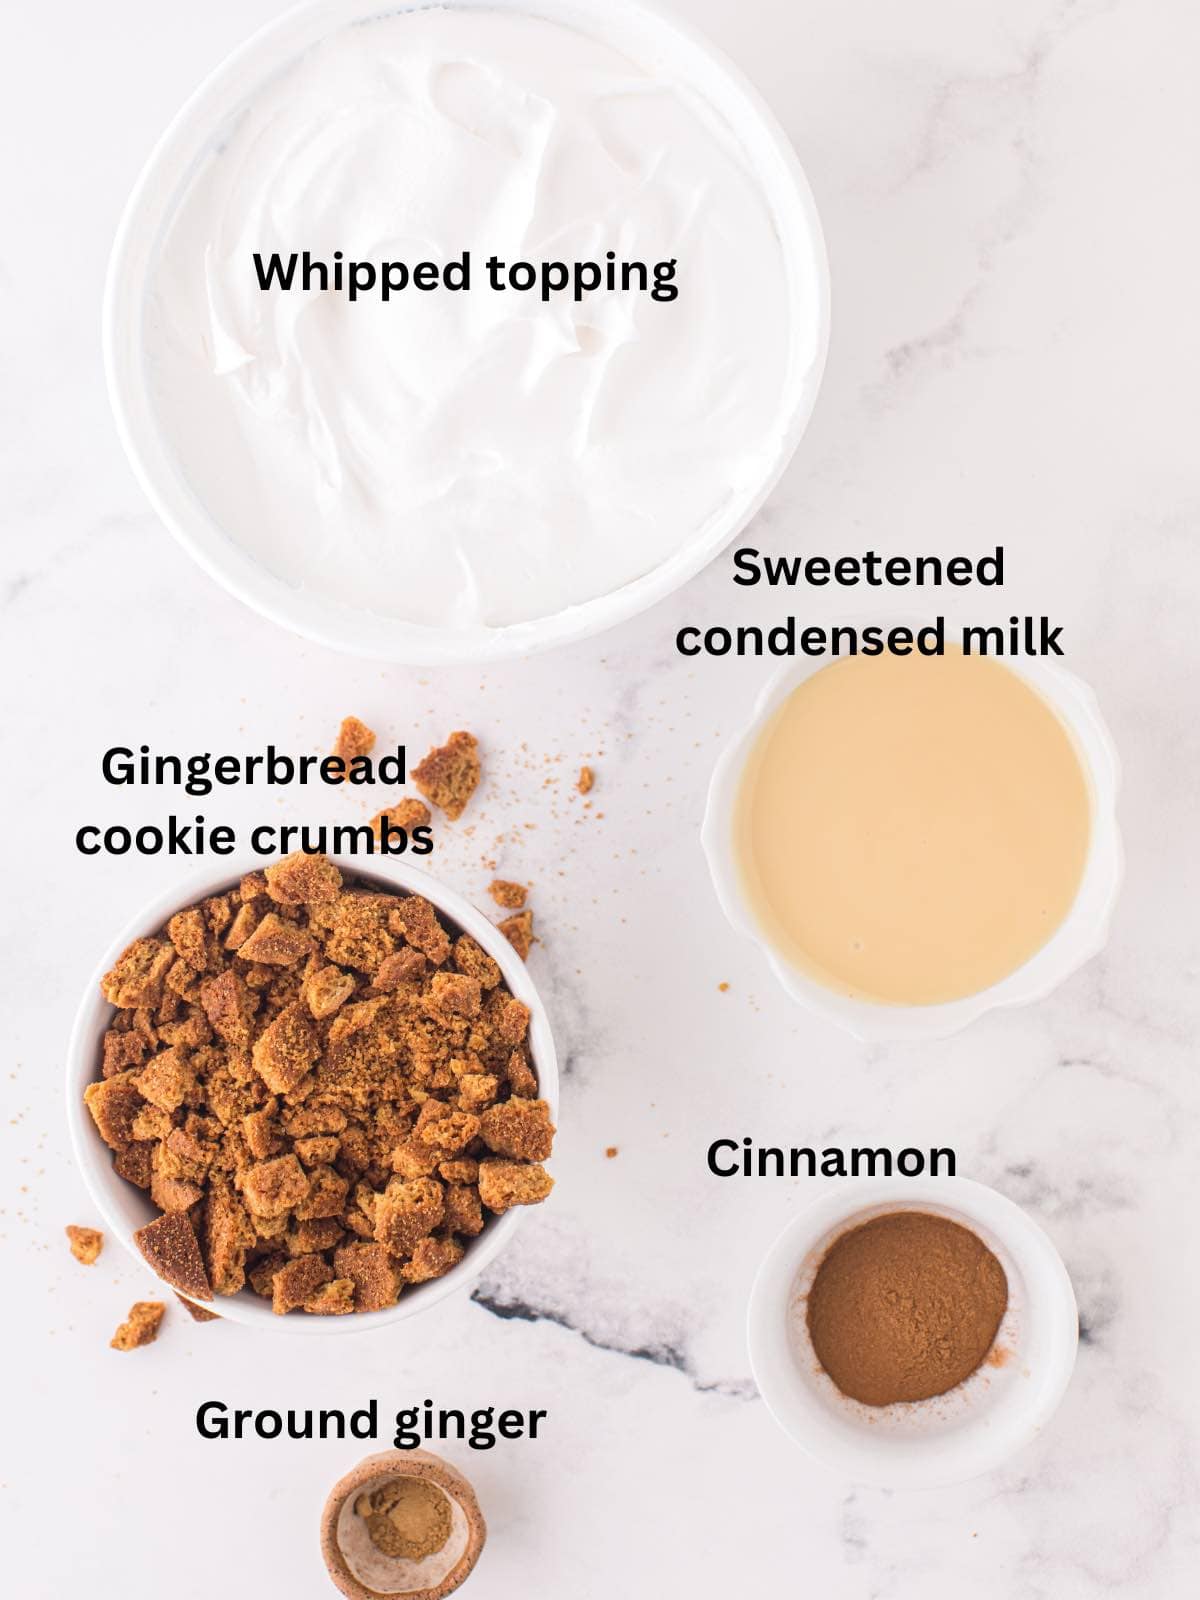 Ingredients for gingerbread ice cream include whipped topping and cookie crumbs. 